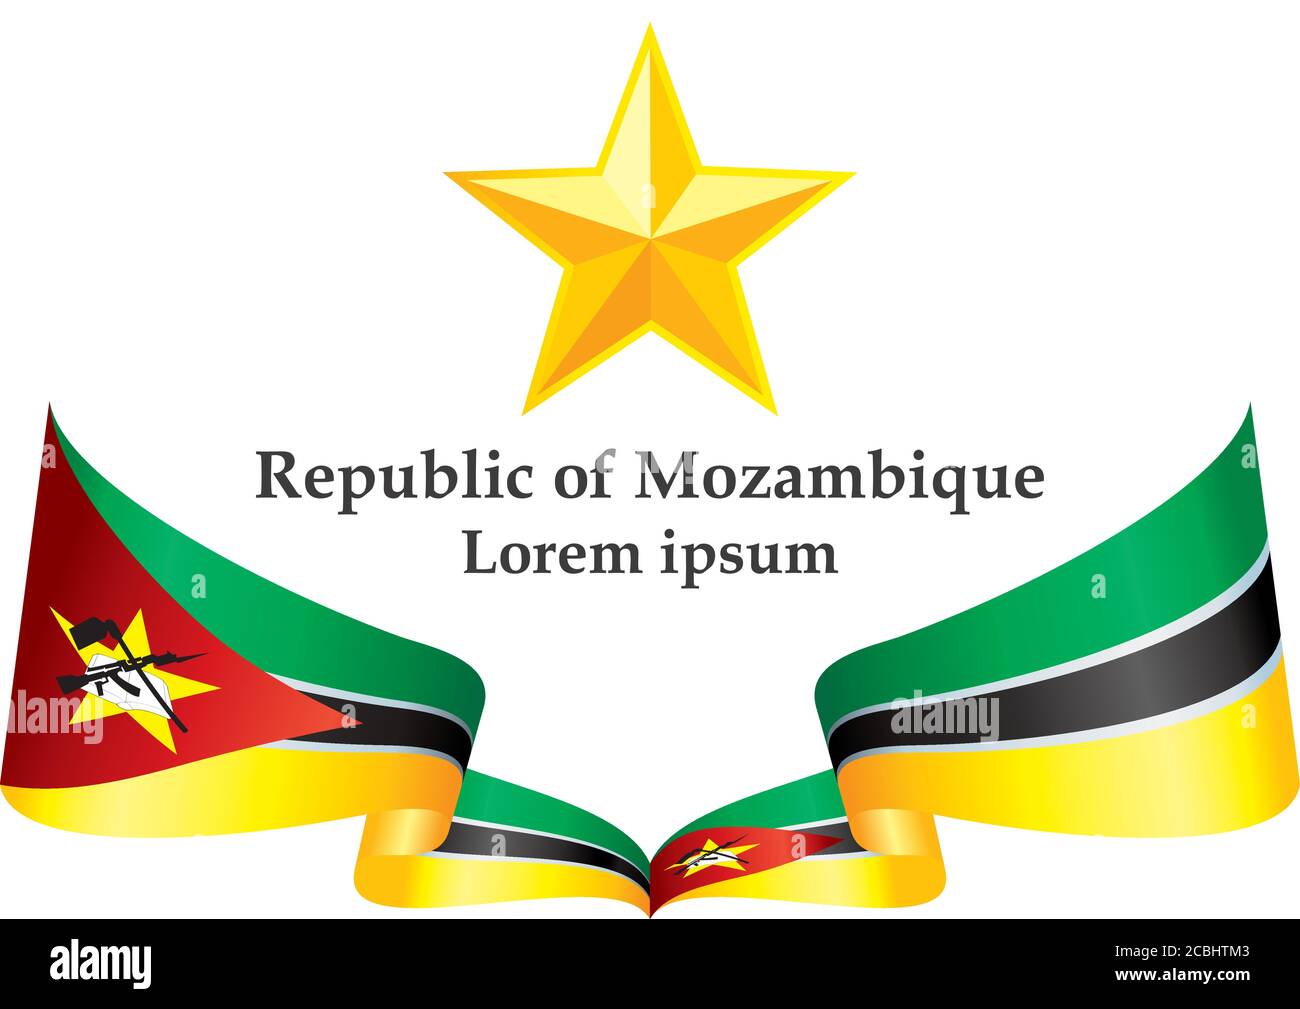 Flag of Mozambique, Republic of Mozambique. Template for award design, an official document with the flag of Mozambique. Bright, colorful vector illus Stock Vector